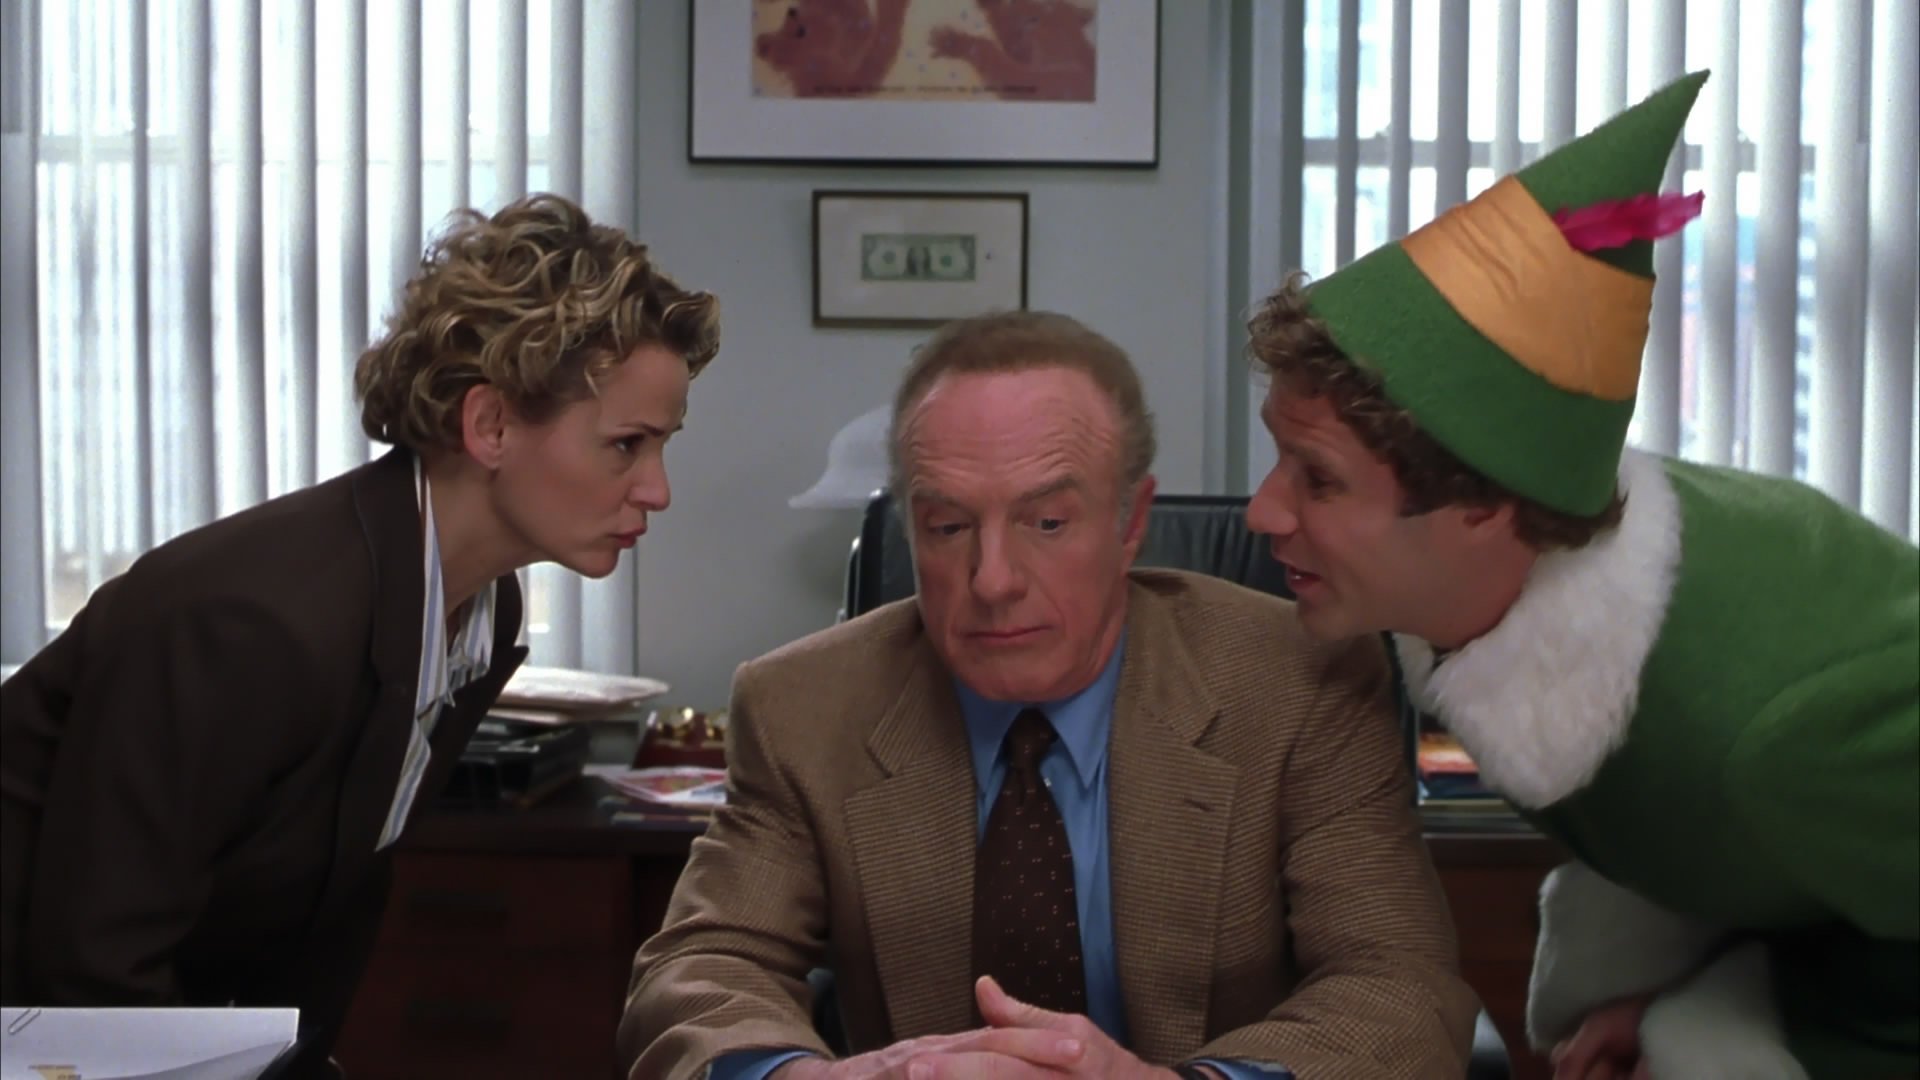 Happy Birthday to James Caan(middle), who turns 77 today! 